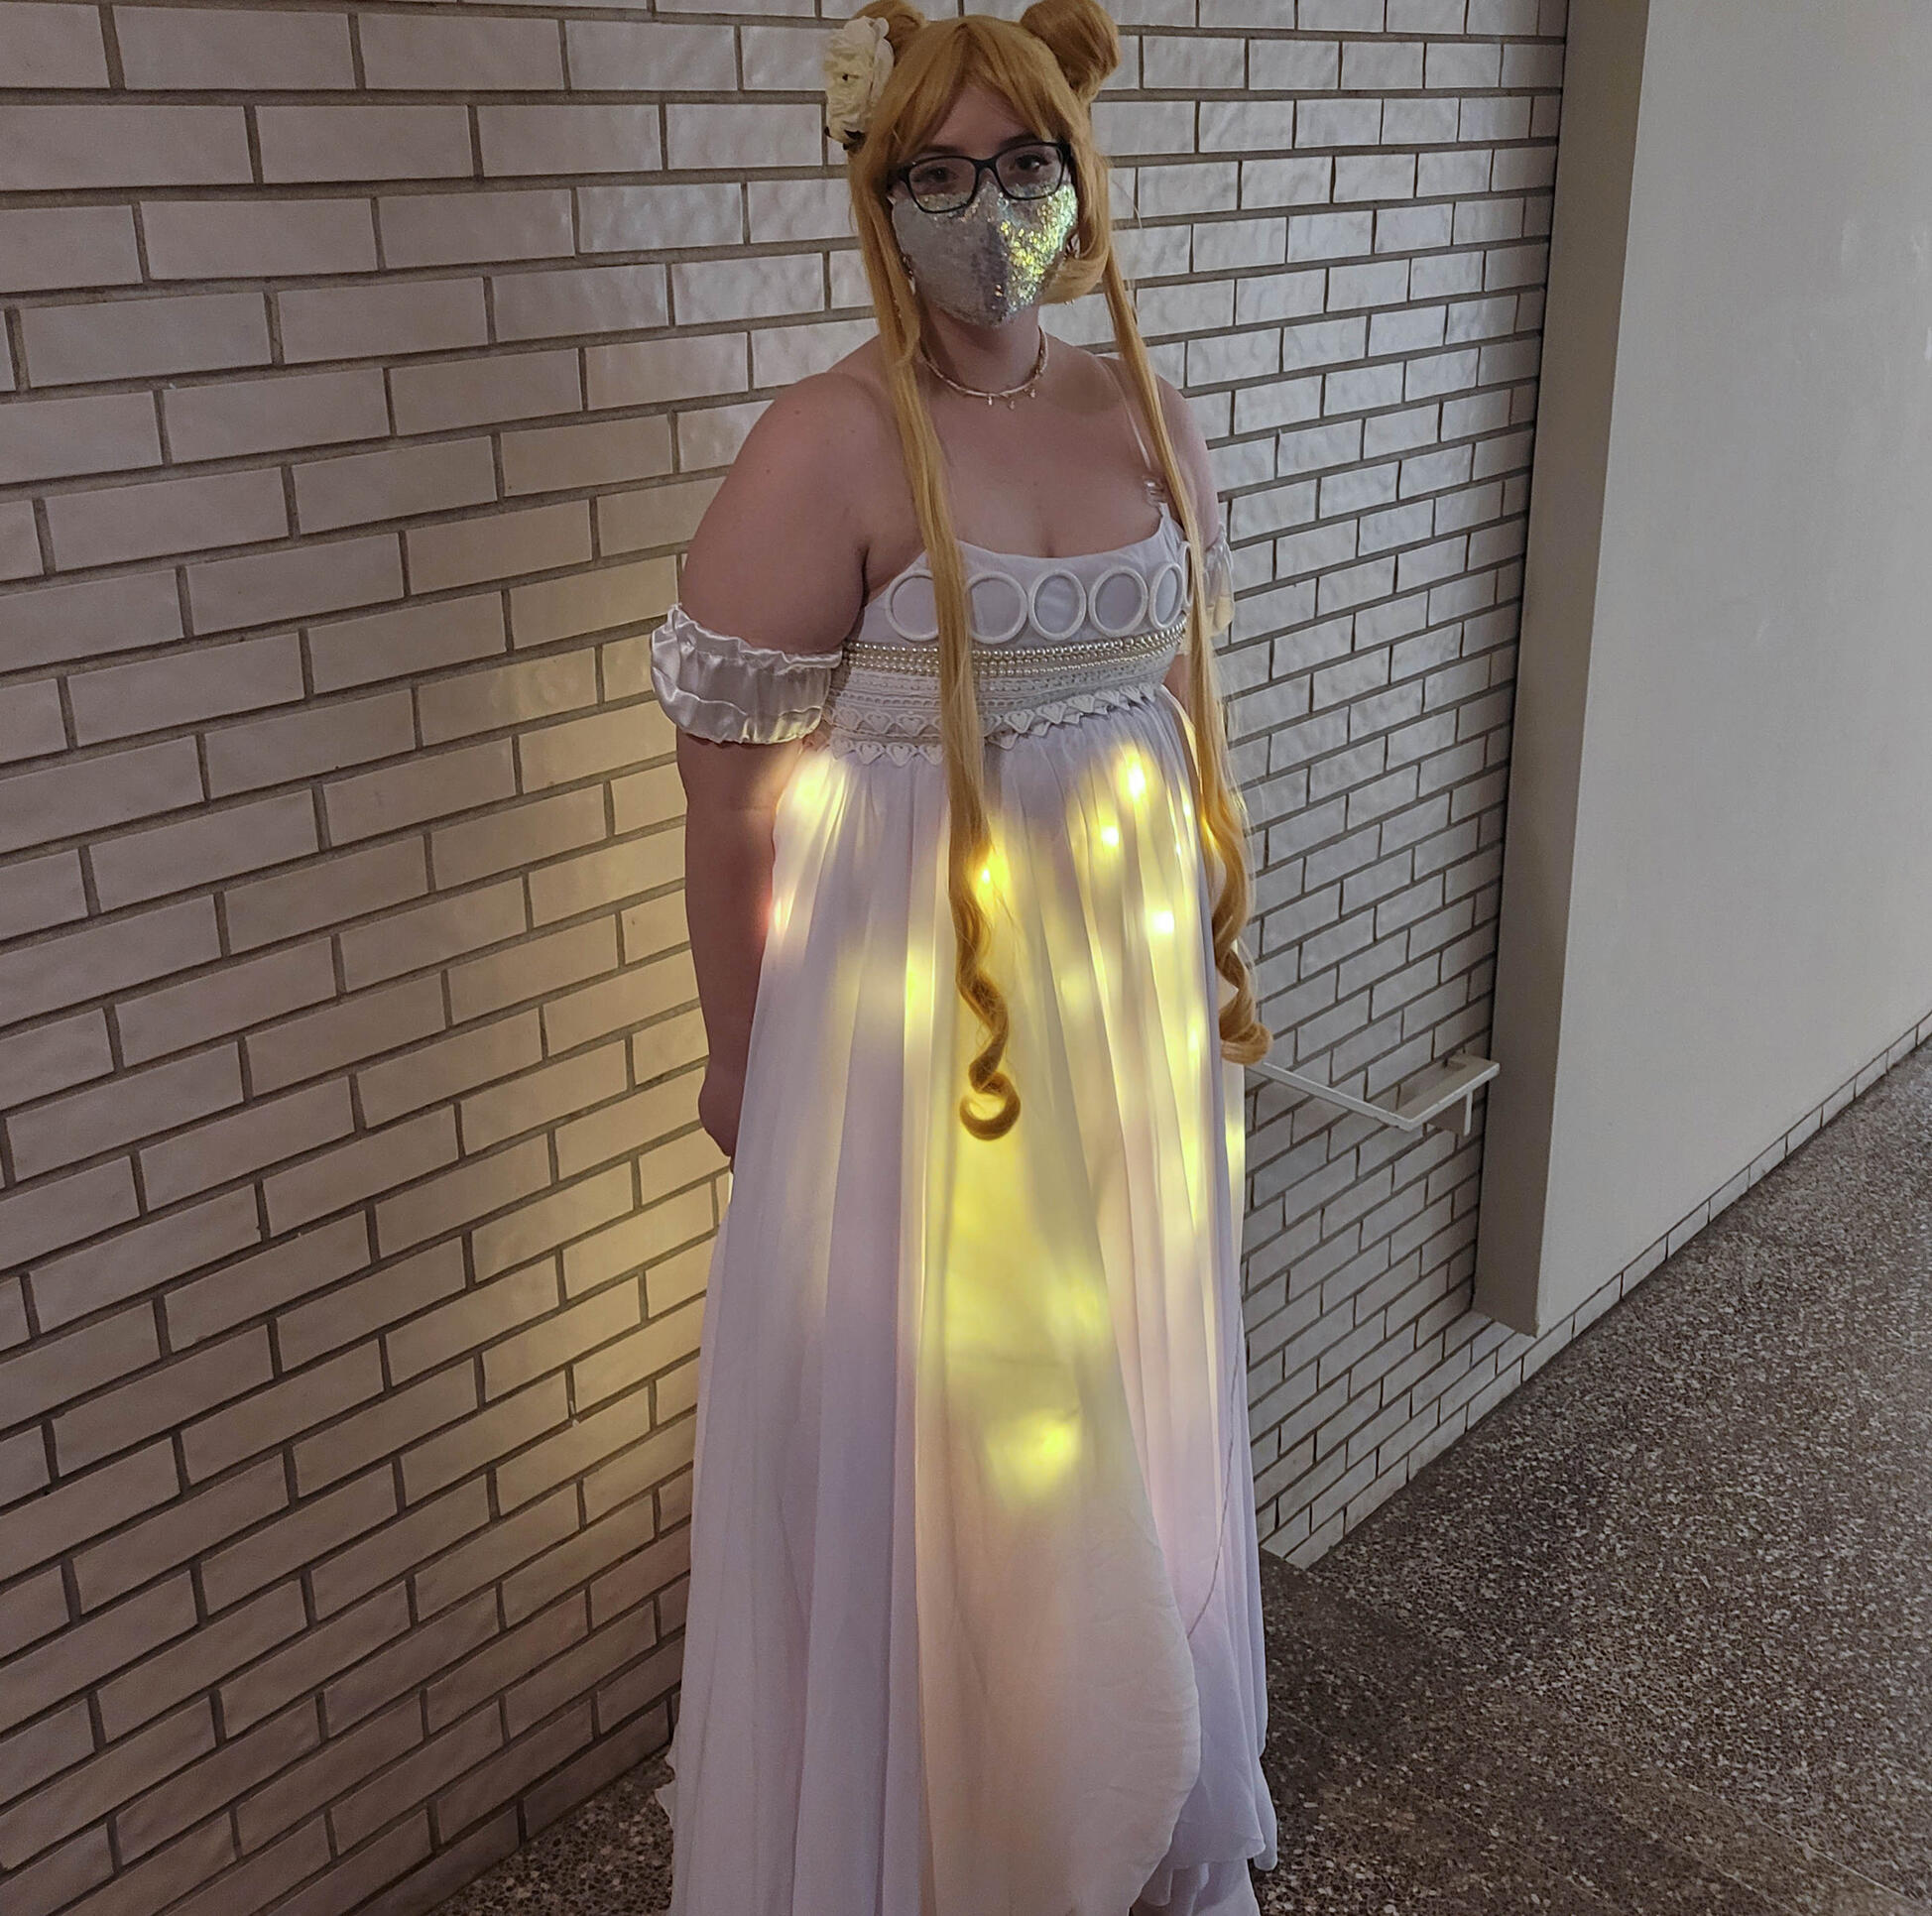 Kaleigh Lagerquist as Princess Serenity from Sailor Moon